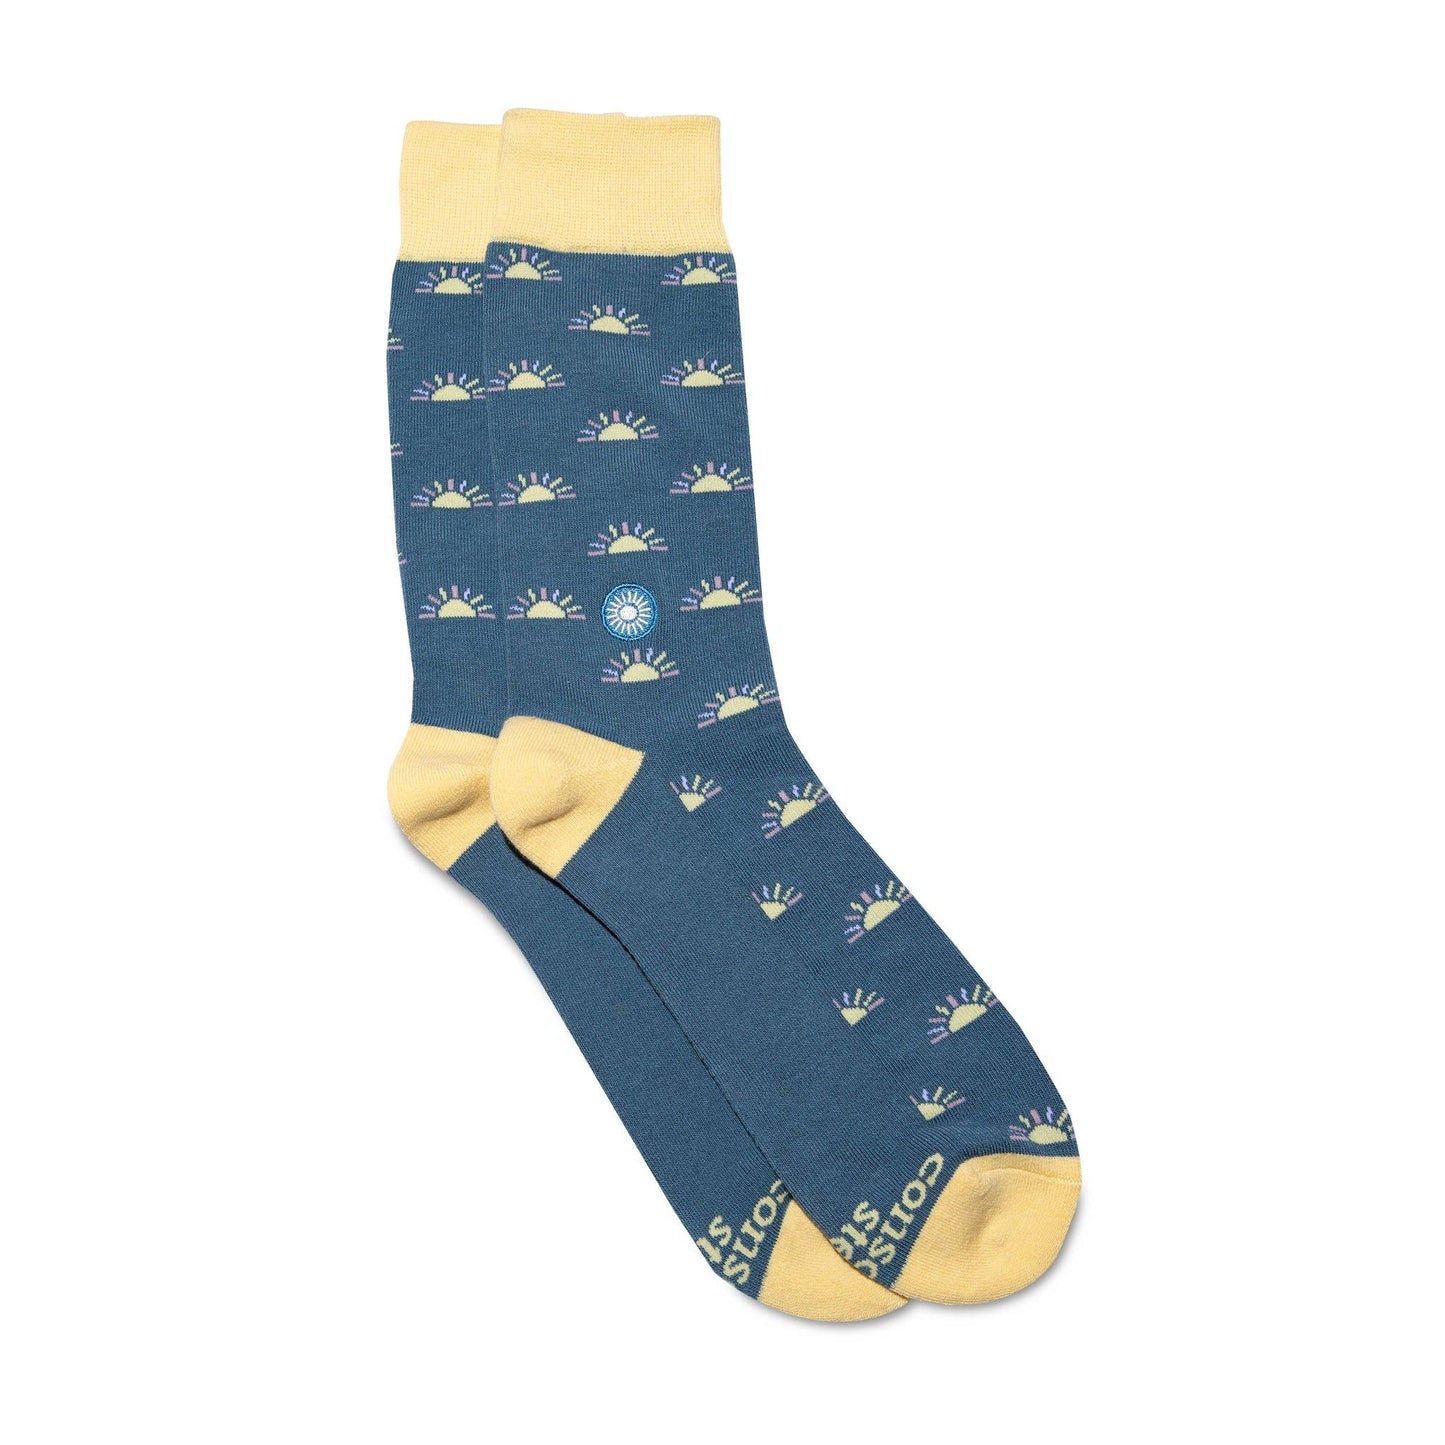 Socks that Support Mental Health - Blue and Yellow Rising Suns